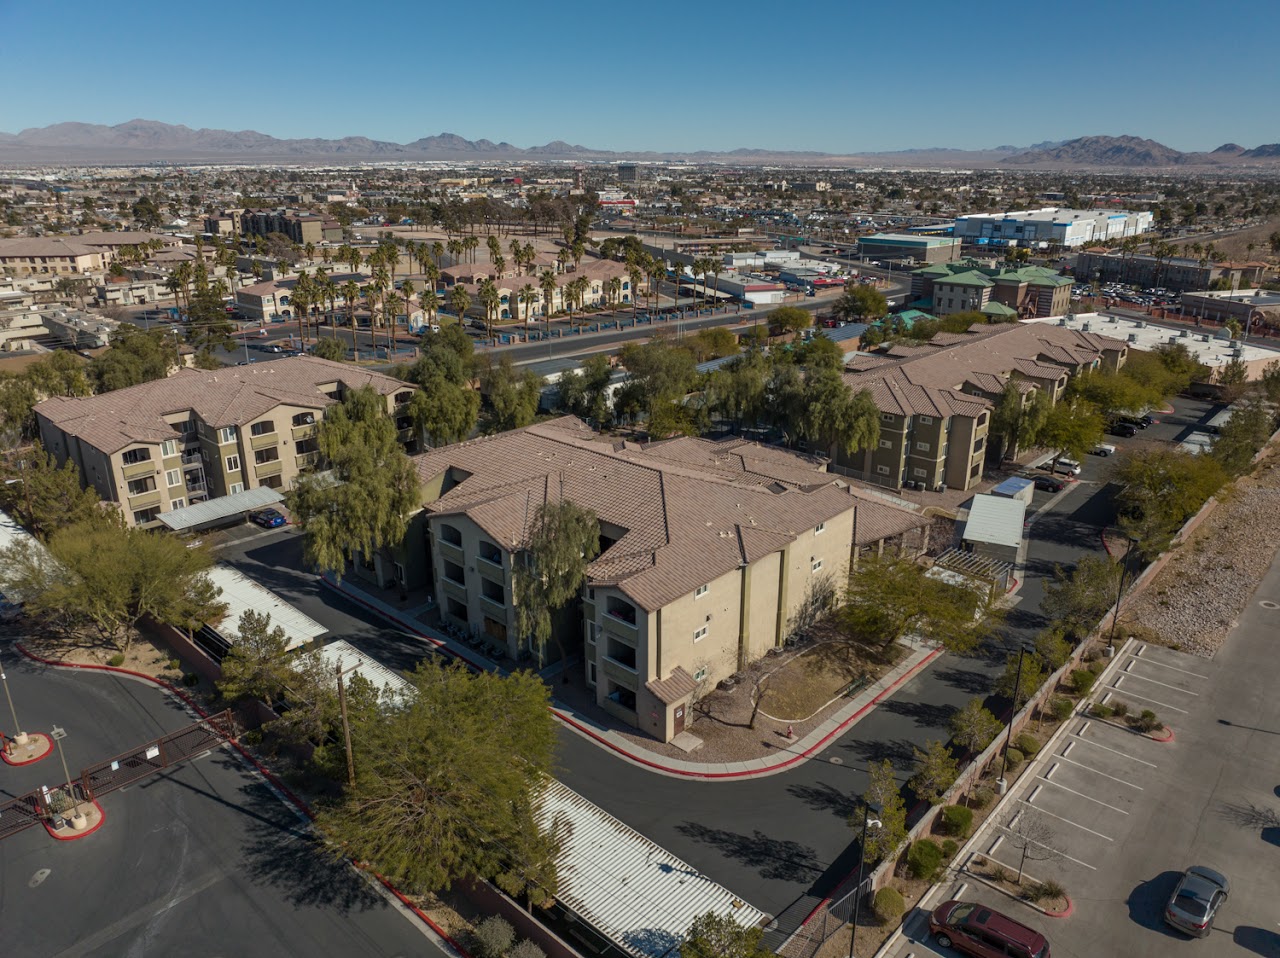 Photo of HORIZON CREST. Affordable housing located at 13 W OWENS AVE. LAS VEGAS, NV 89101